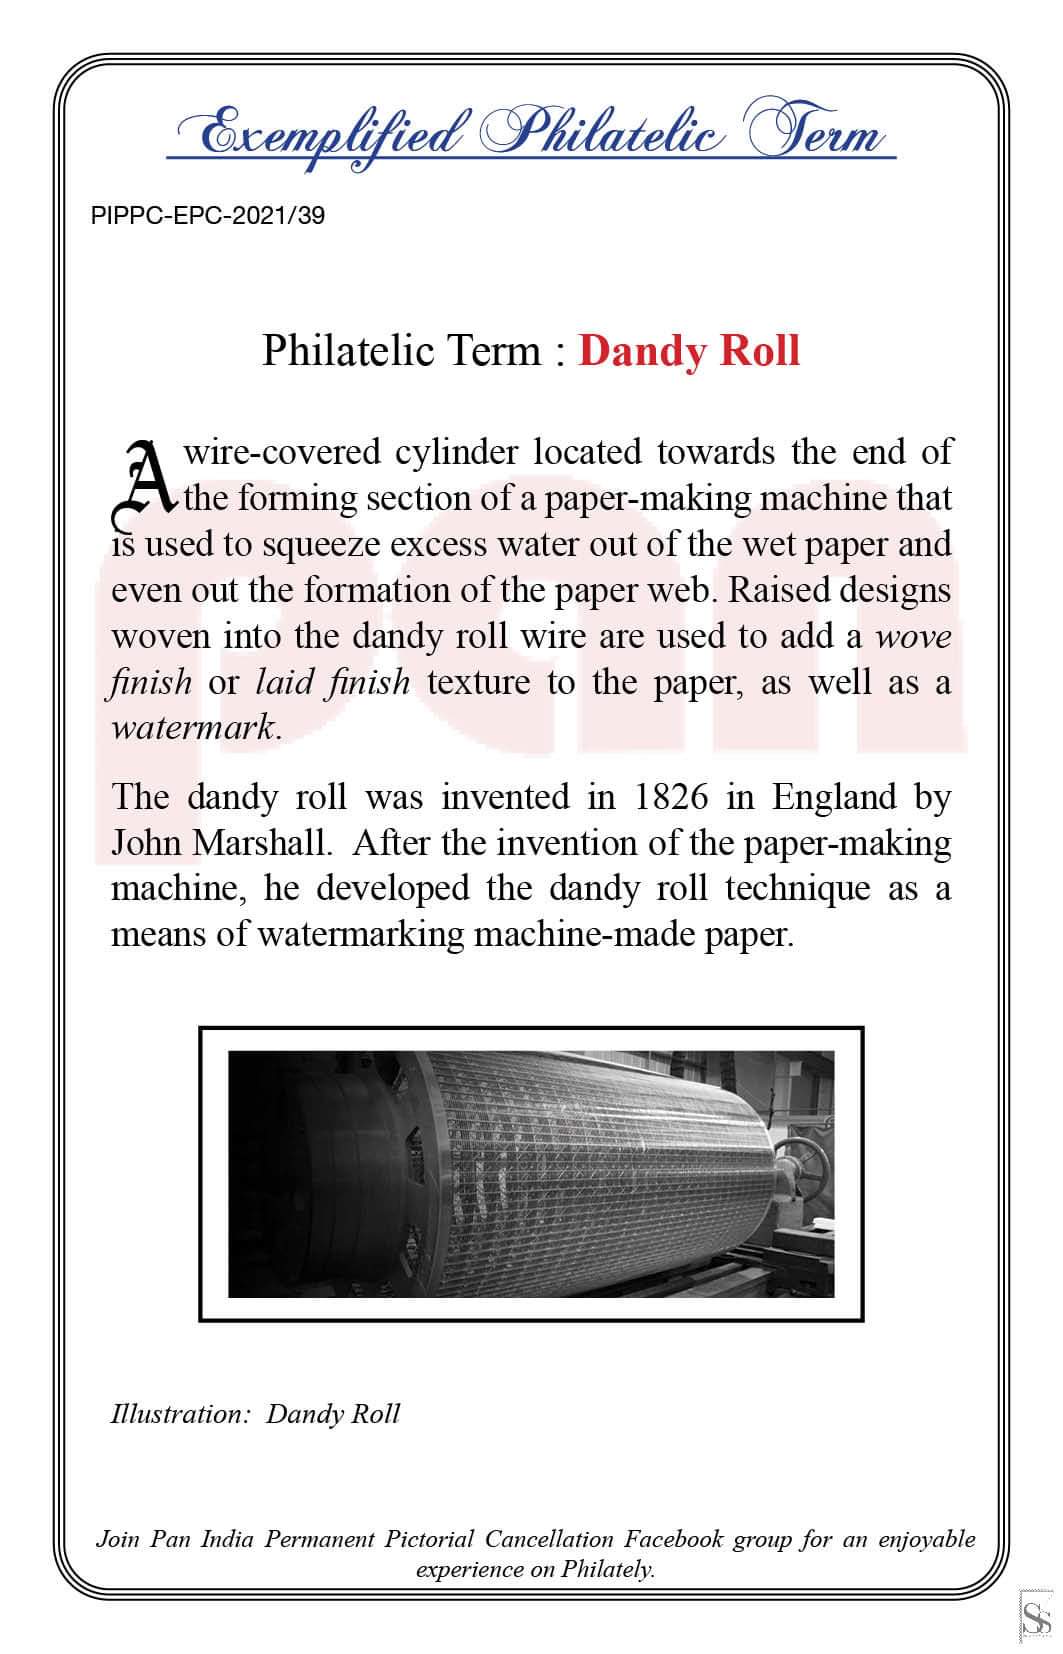 39. Today's Exemplified Philatelic term-Dandy Roll